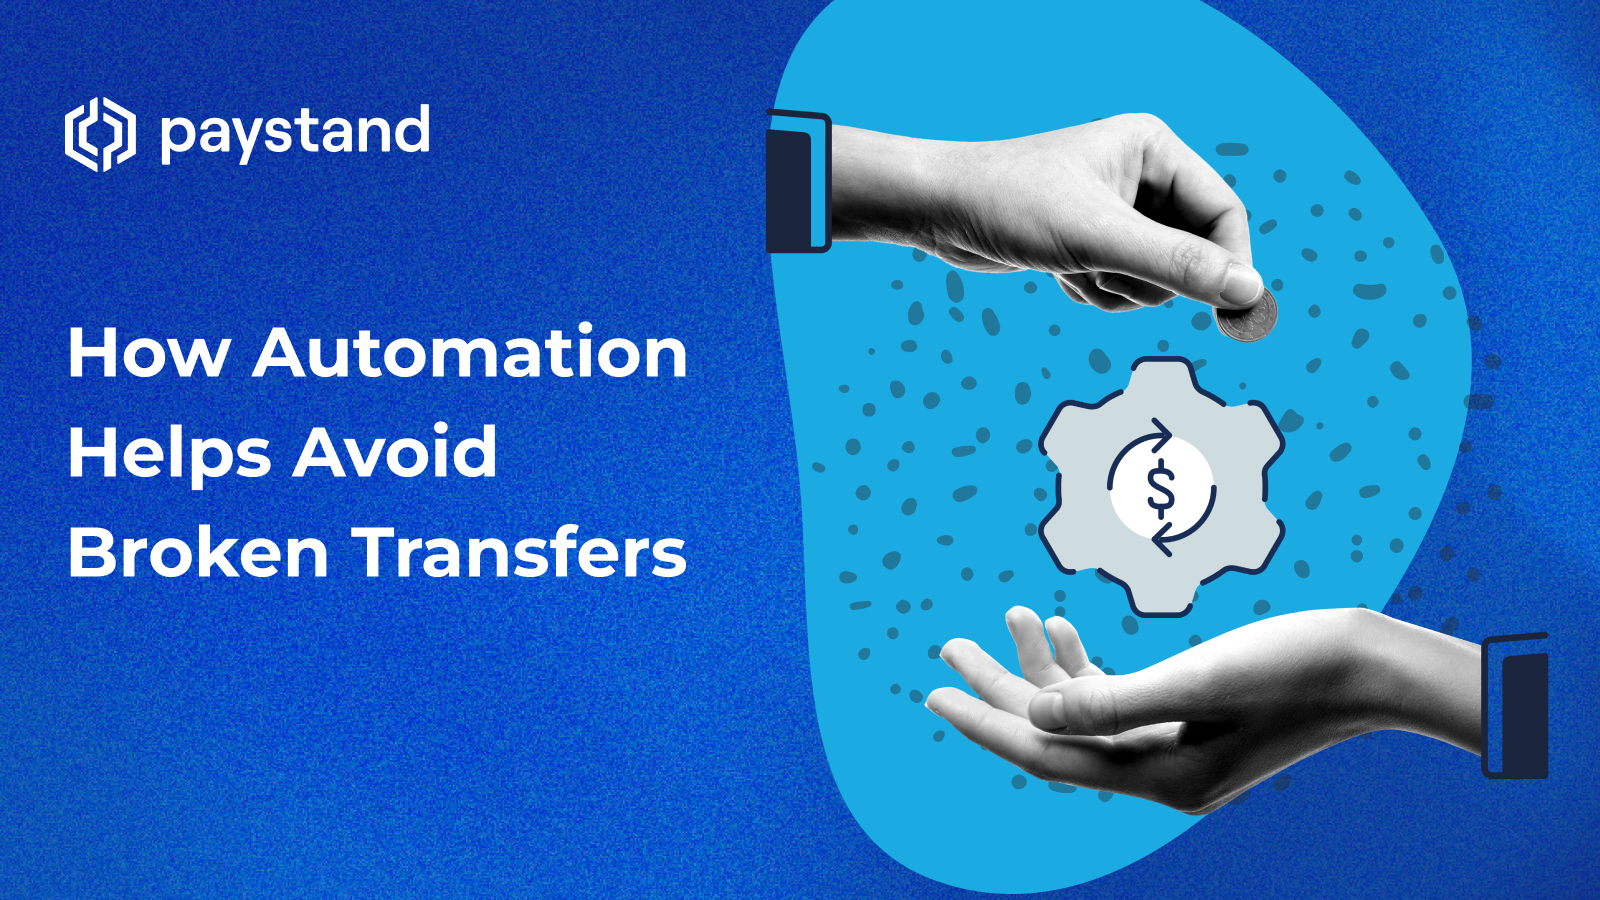 How Automation Helps Avoid Broken Transfers